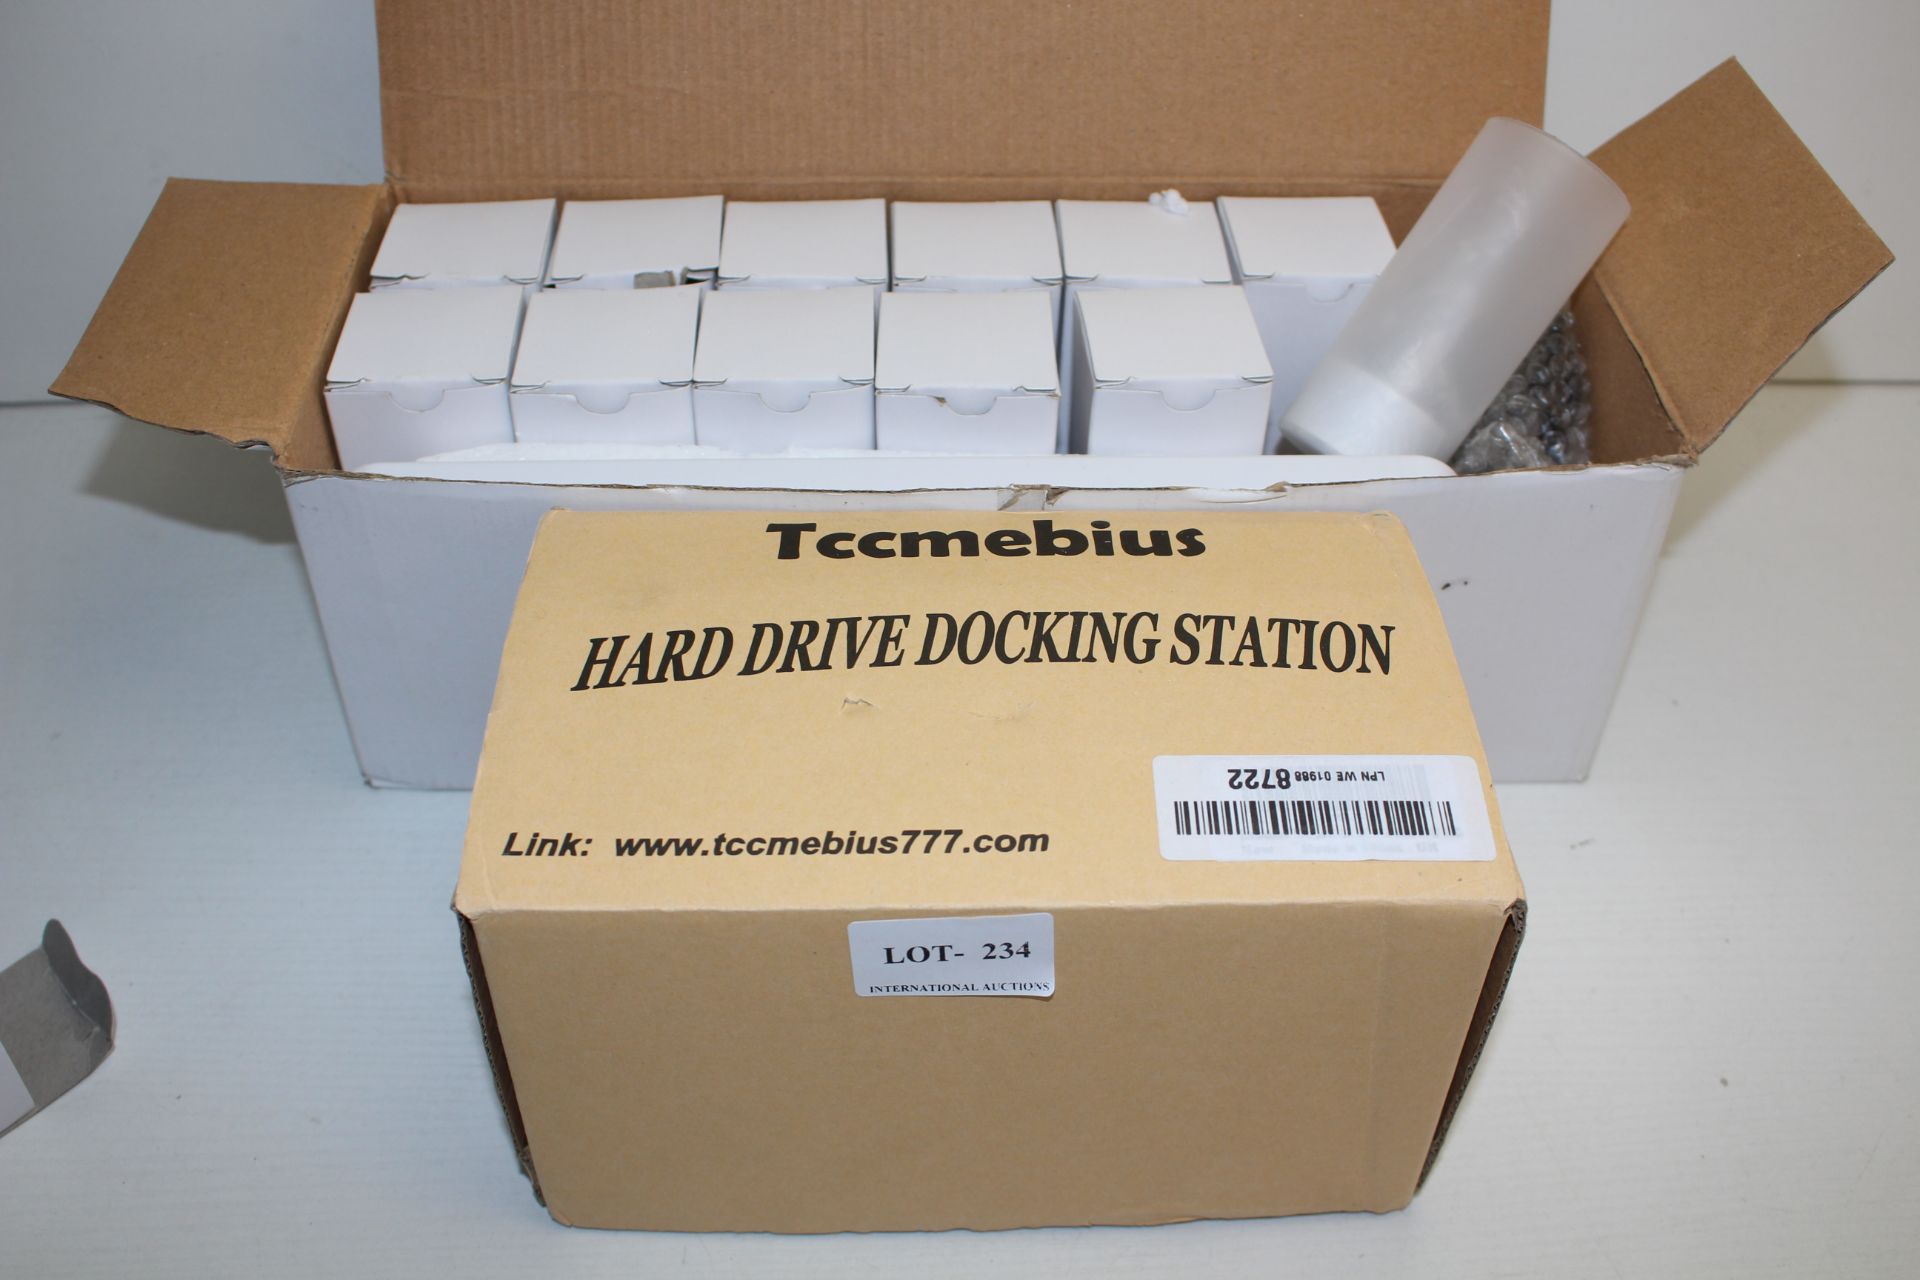 2X BOXED ITEMS TO INCLUDE 12X LED LIGHT STAND & TCCMEBIUS HARD DRIVE DOCKING STATIONCondition